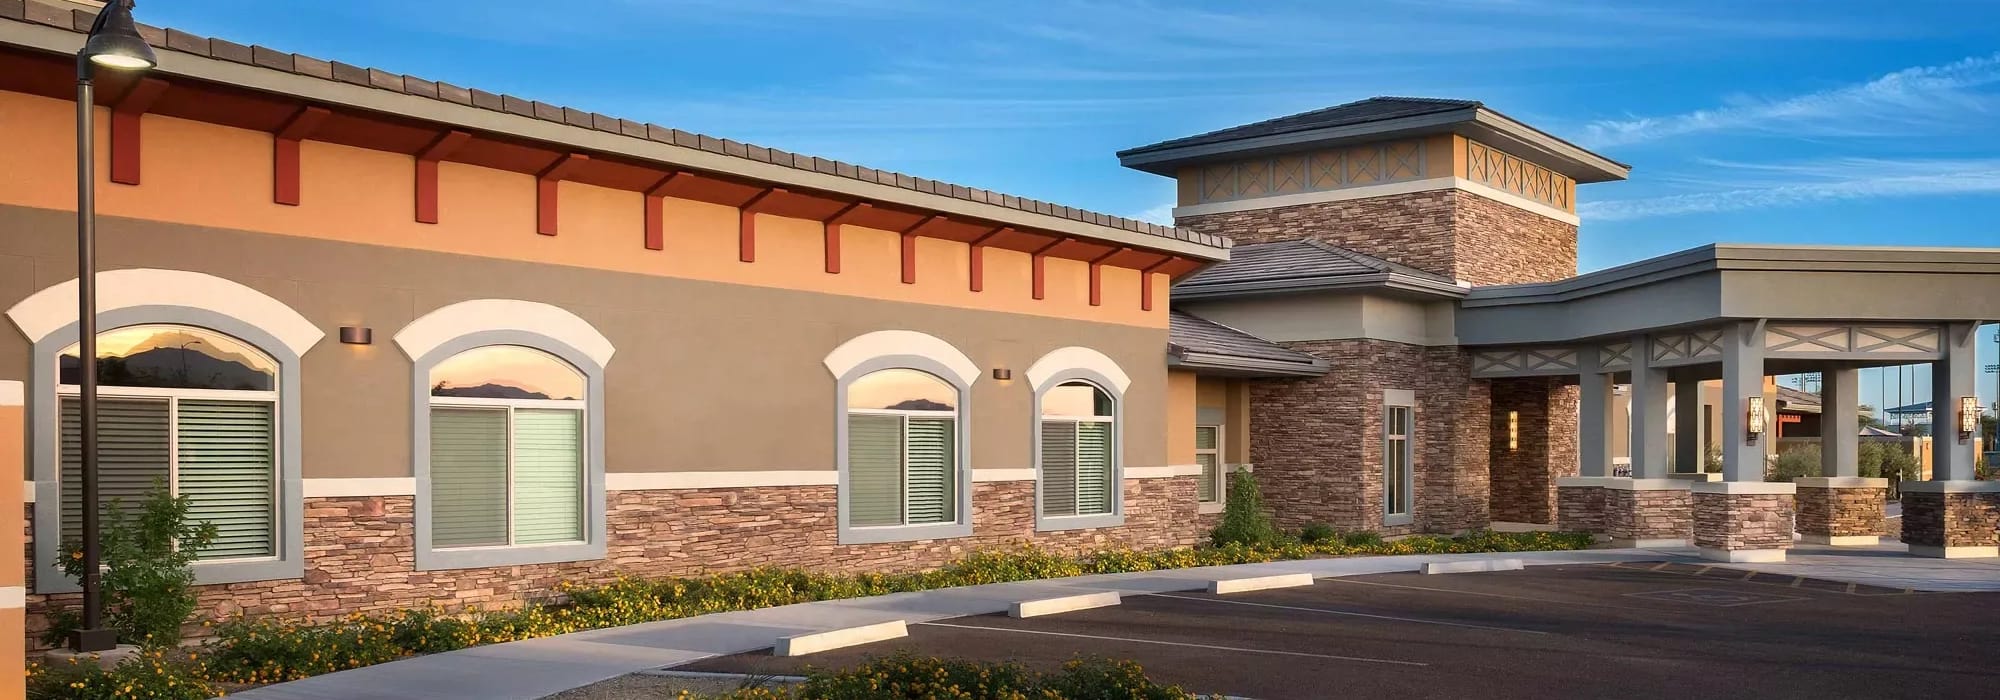 Information about Our Company at Avenir Senior Living in Scottsdale, Arizona. 